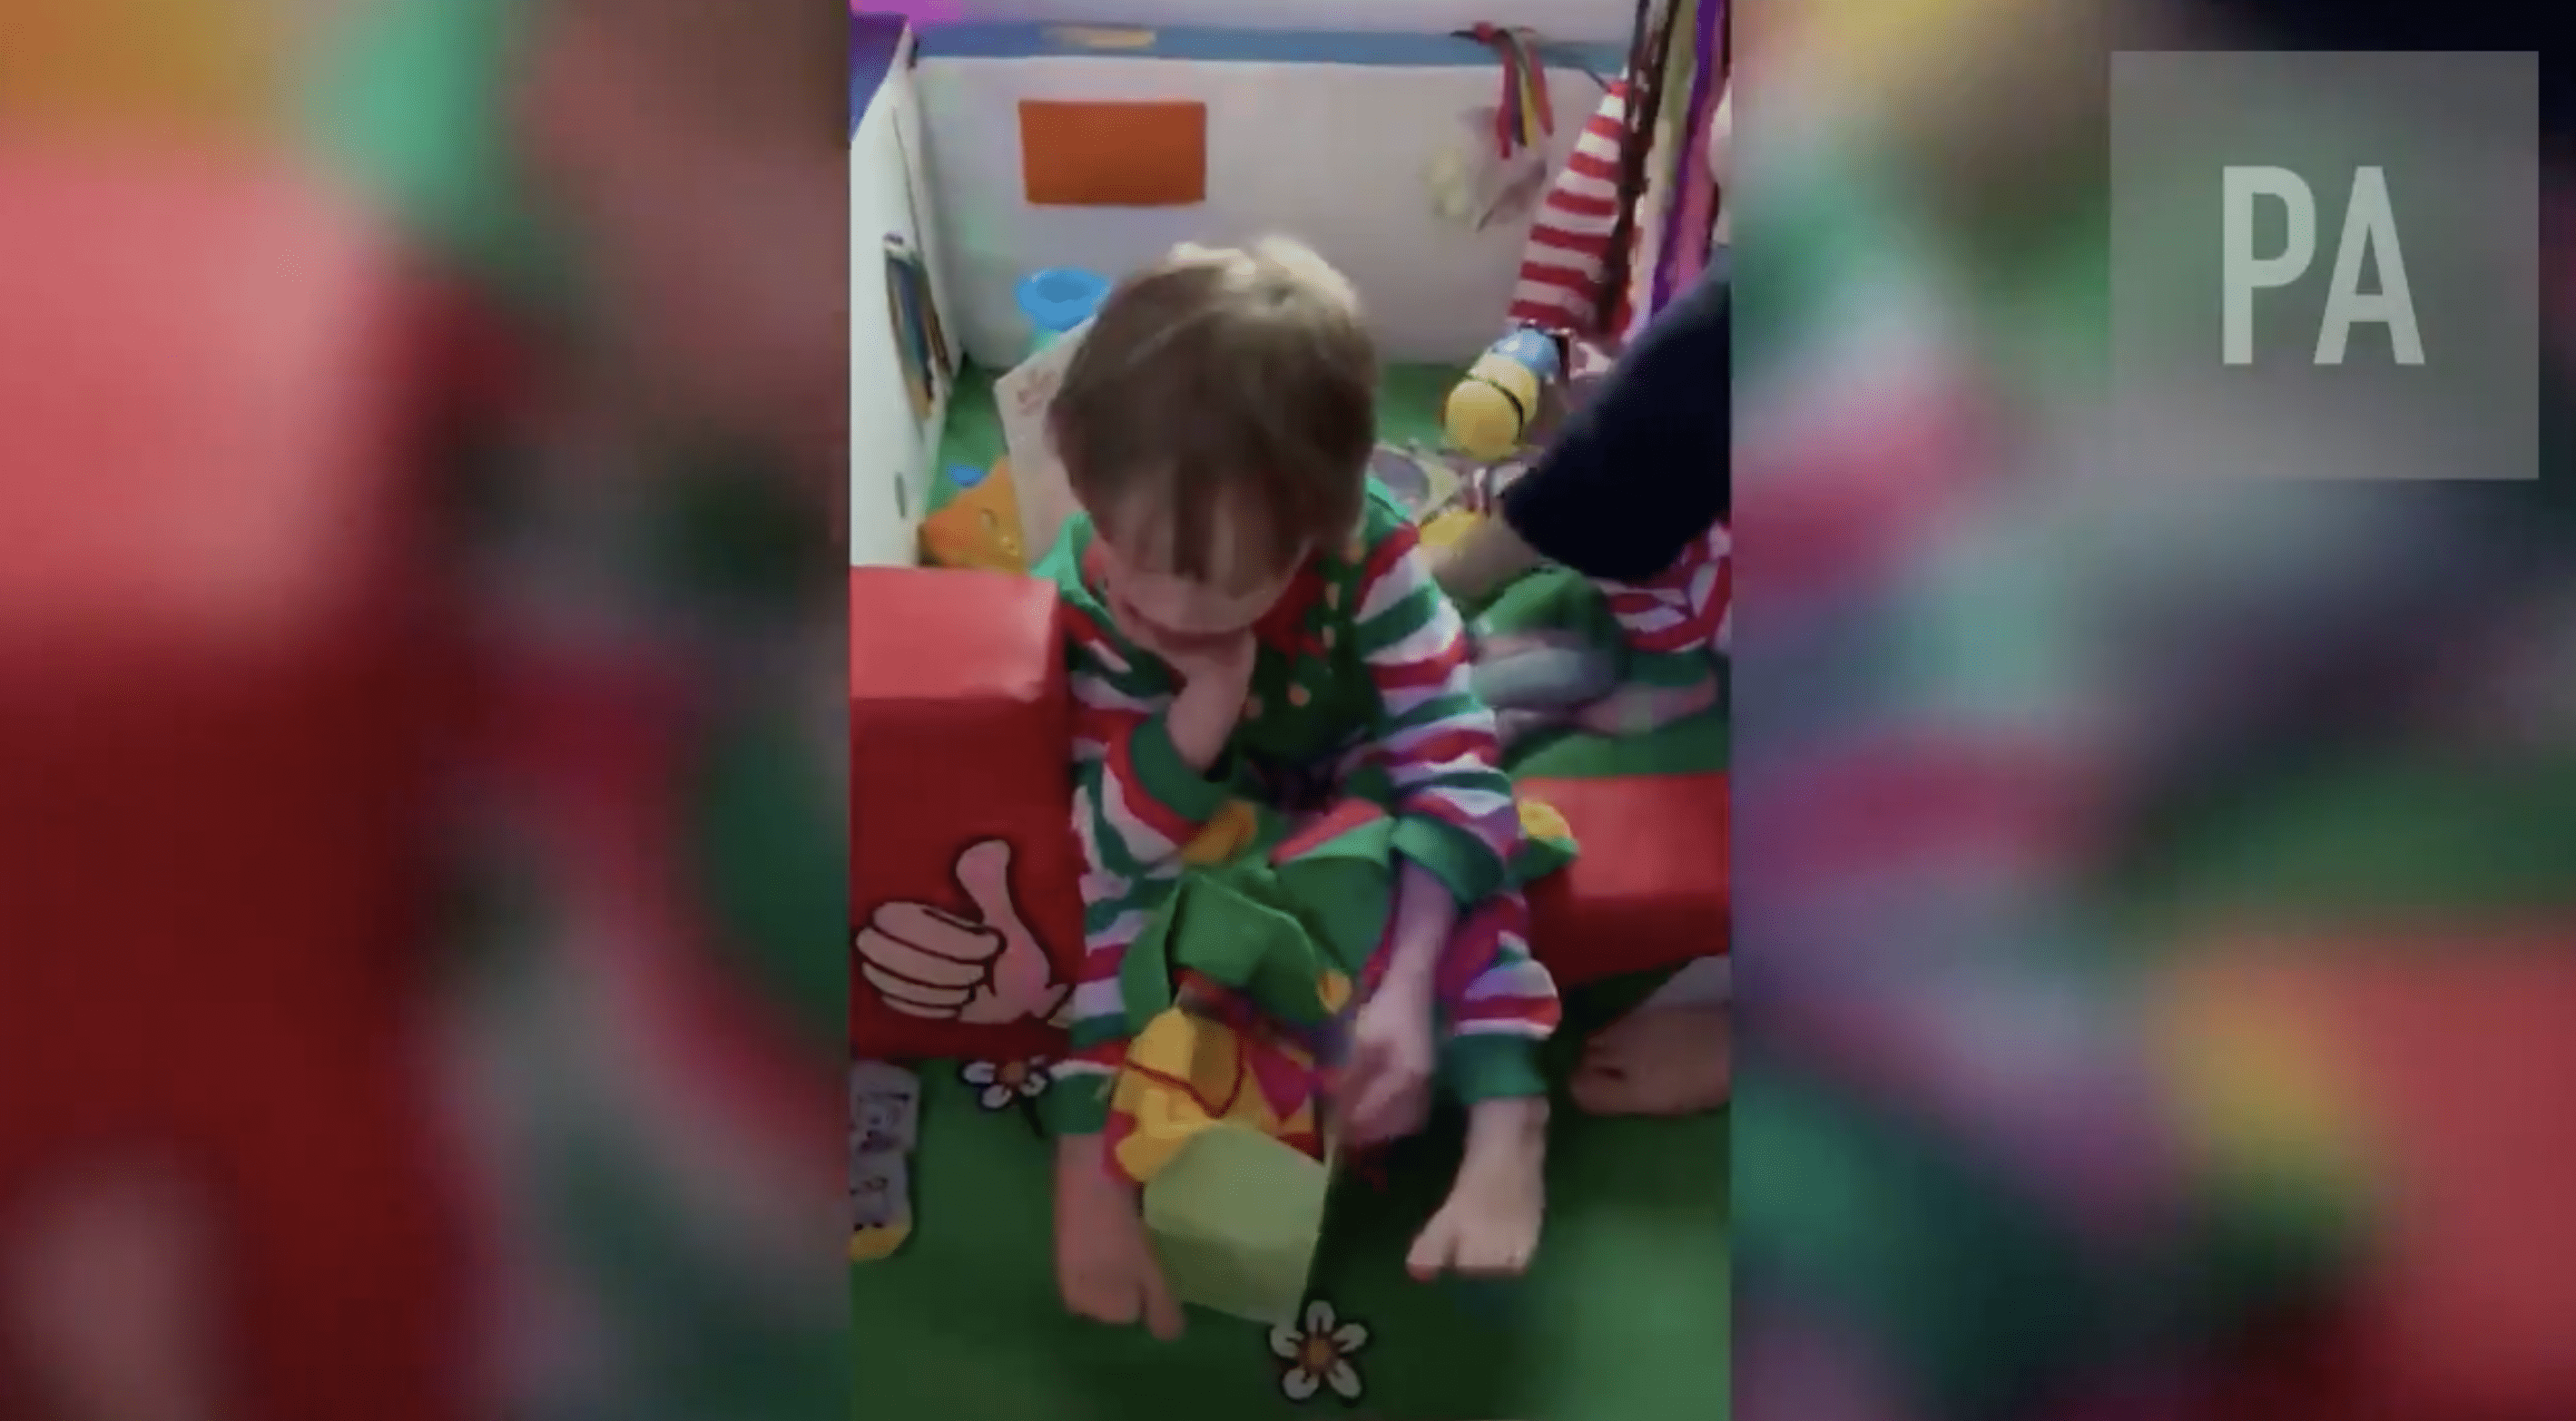 One of Mullard's twin boys is seen playing with toys. | Source: twitter.com/PA